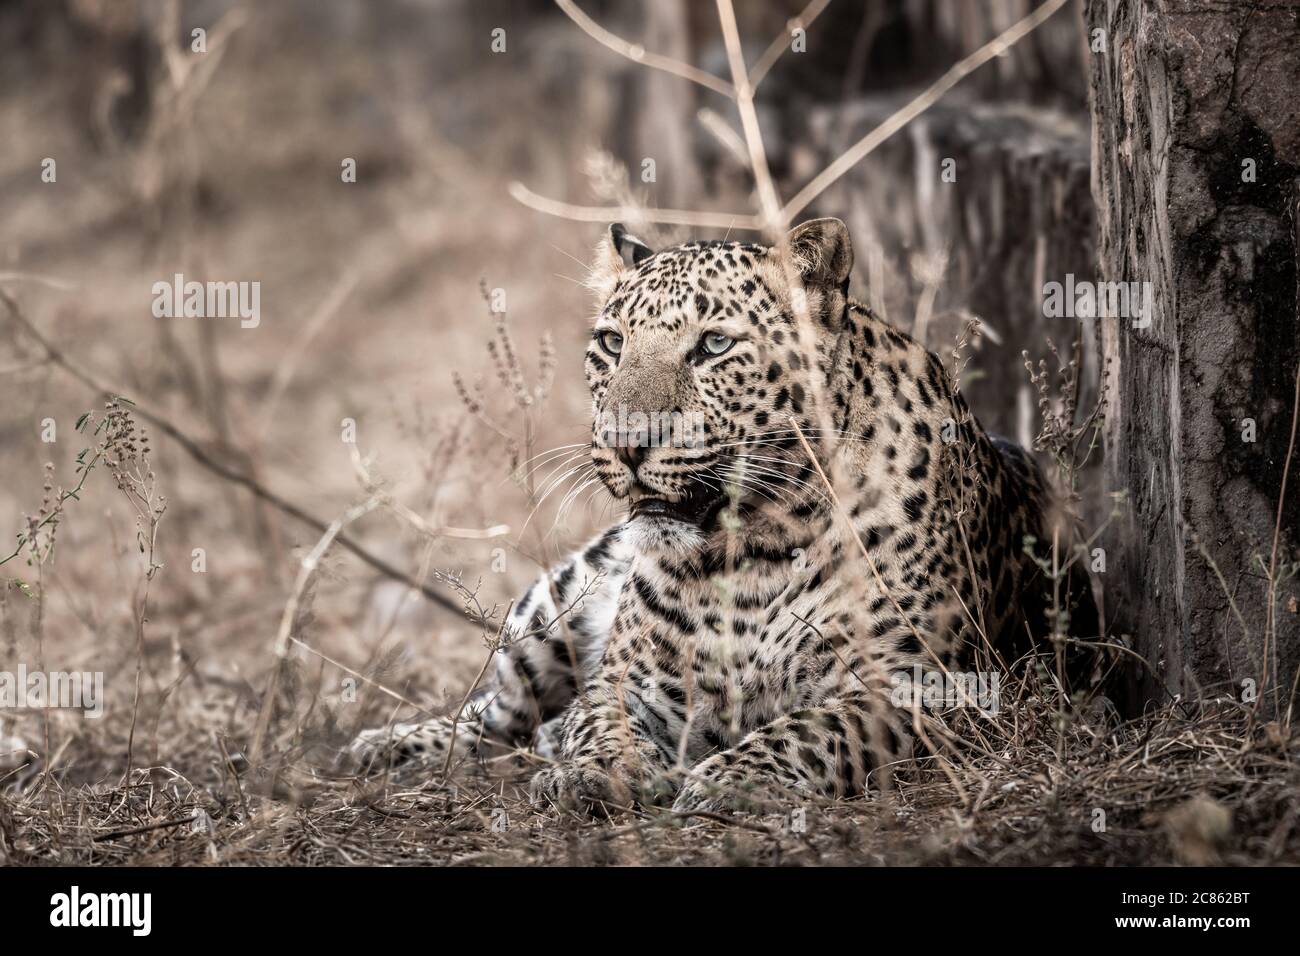 Fine art image of Huge wild male leopard or panther or panthera pardus fusca in central india forest Stock Photo